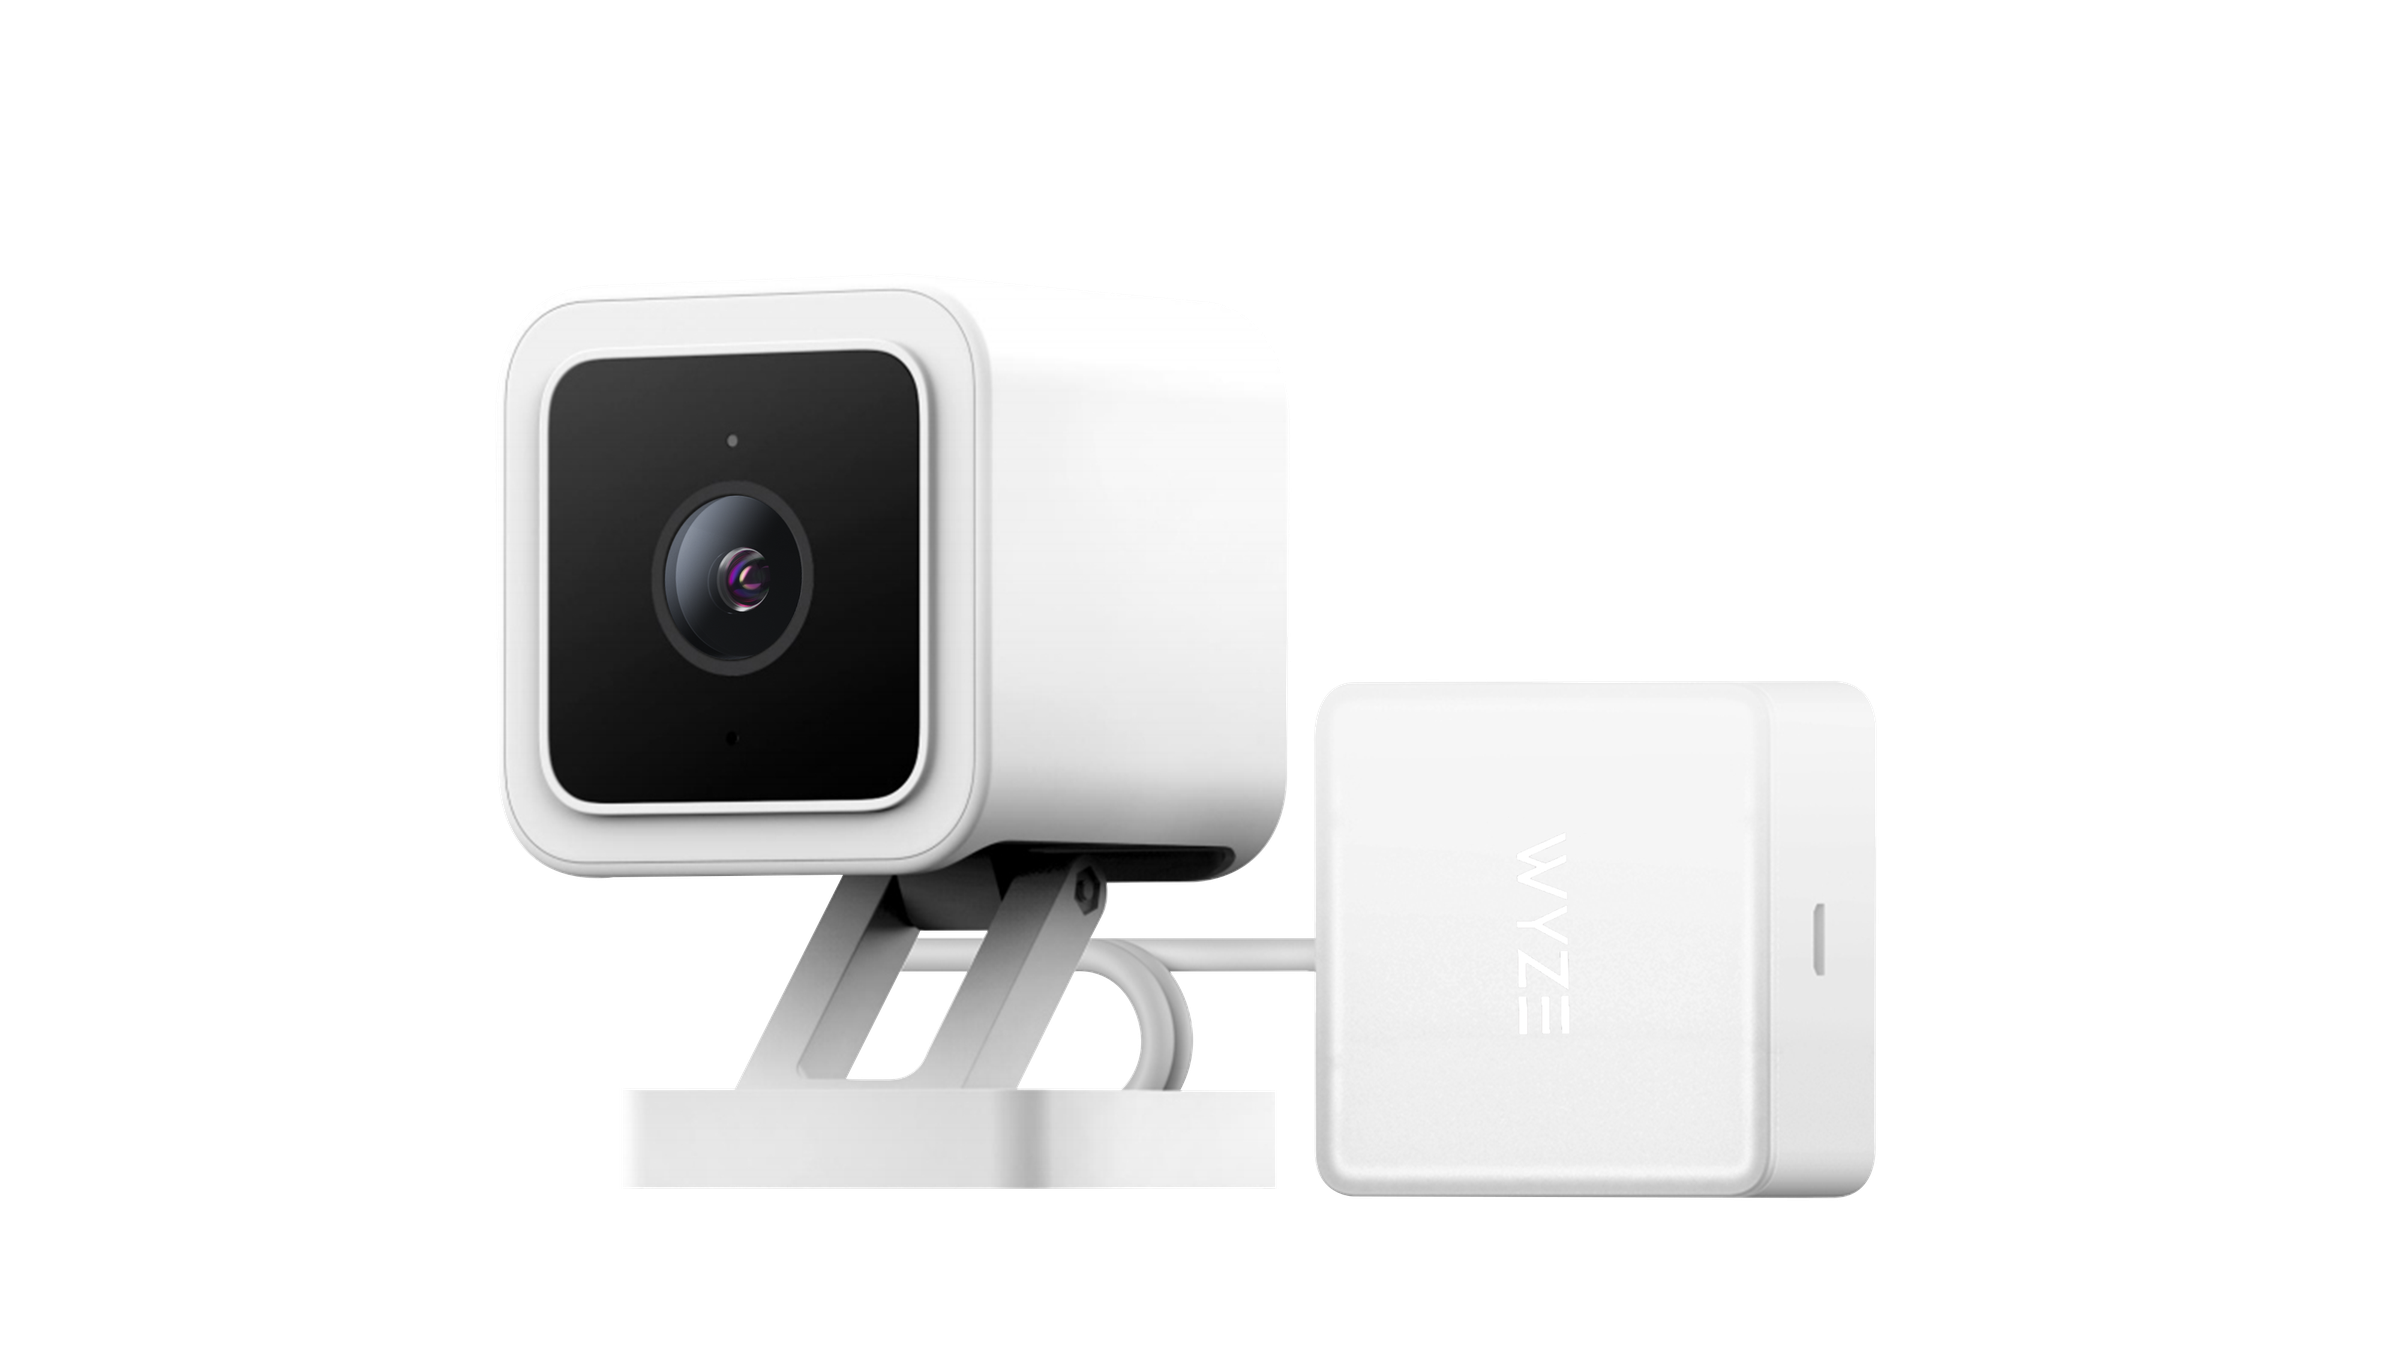 The Wyze Cam v3 and the Garage Door Controller will be sold in a bundle, or you can buy the Controller separately.